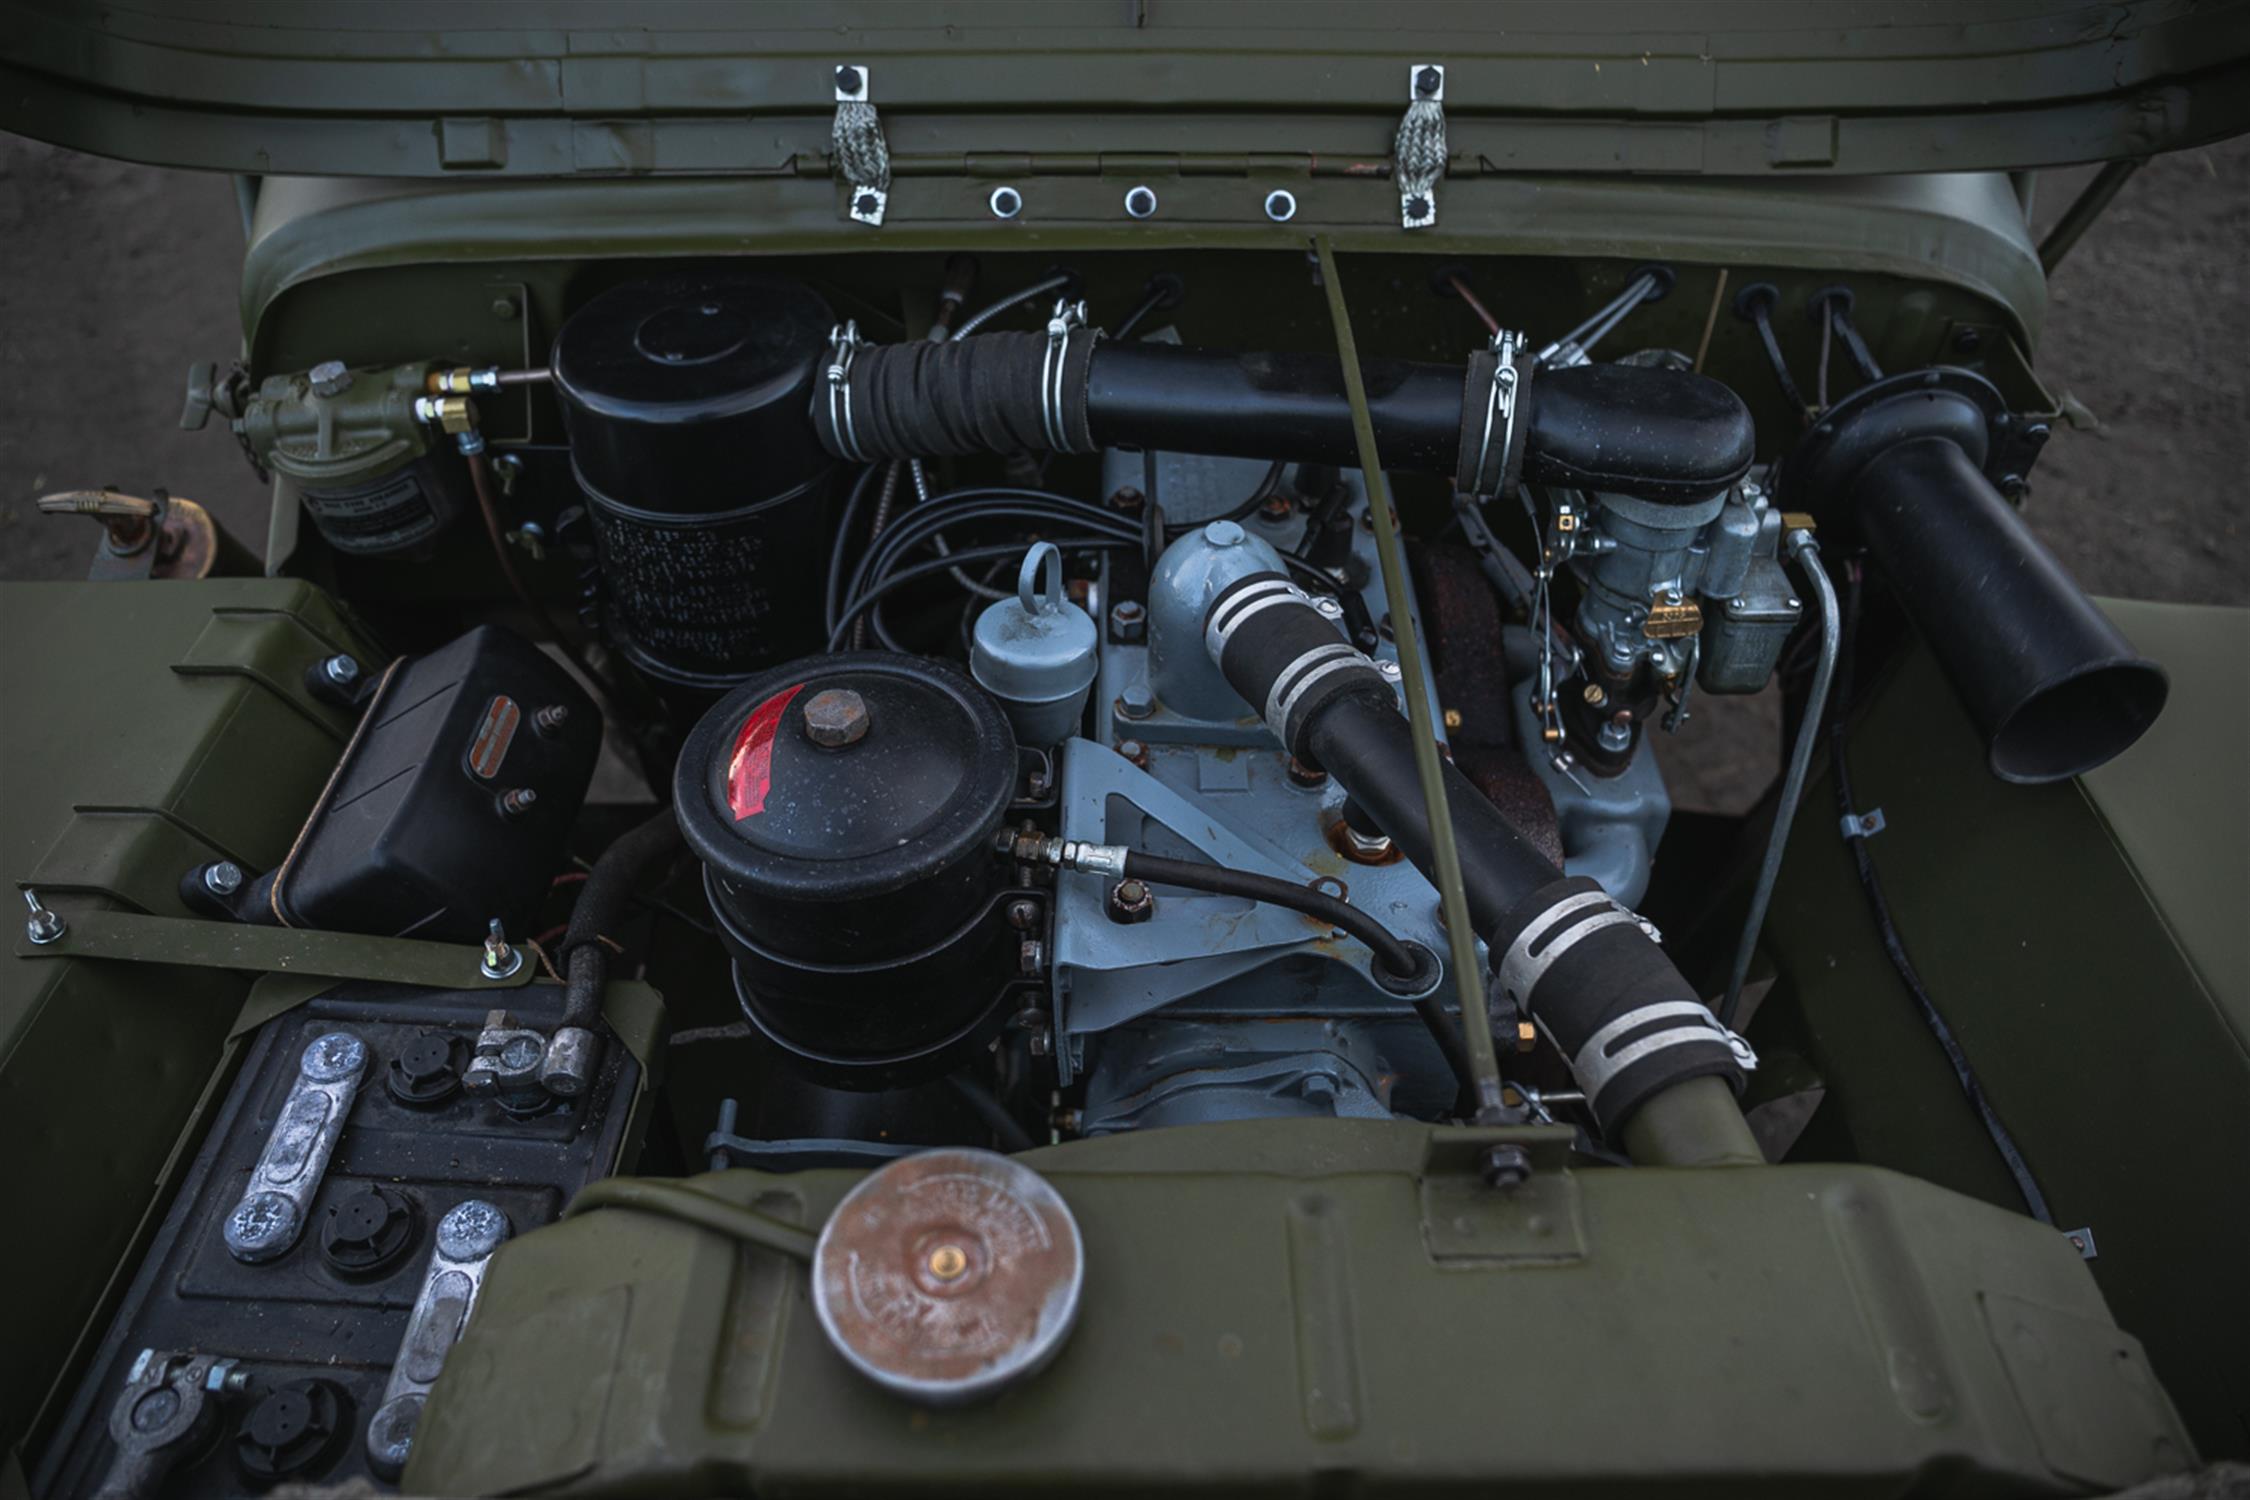 1942 Ford GPW Jeep - King George VI - Image 3 of 10